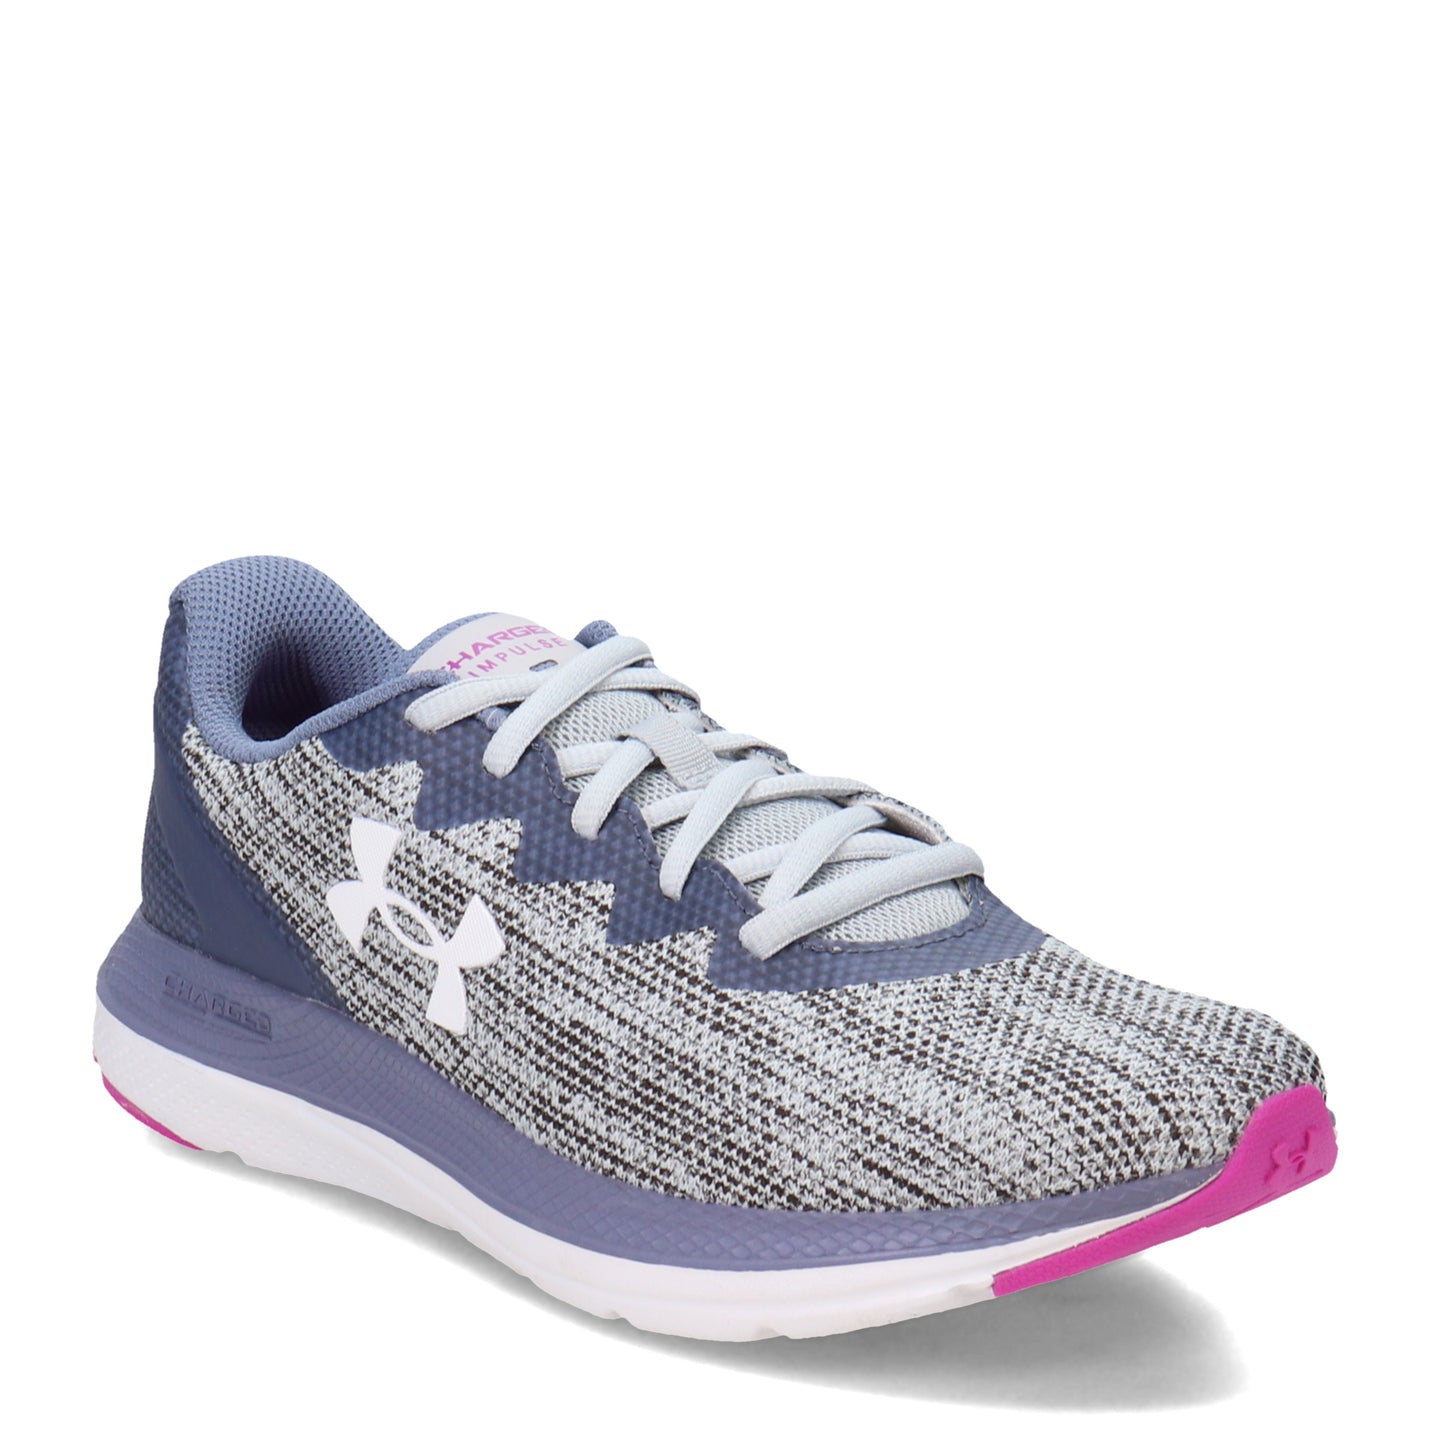 Peltz Shoes  Women's Under Armour Charged Impulse 2 Knit Running Shoe GRAY 3024886-109